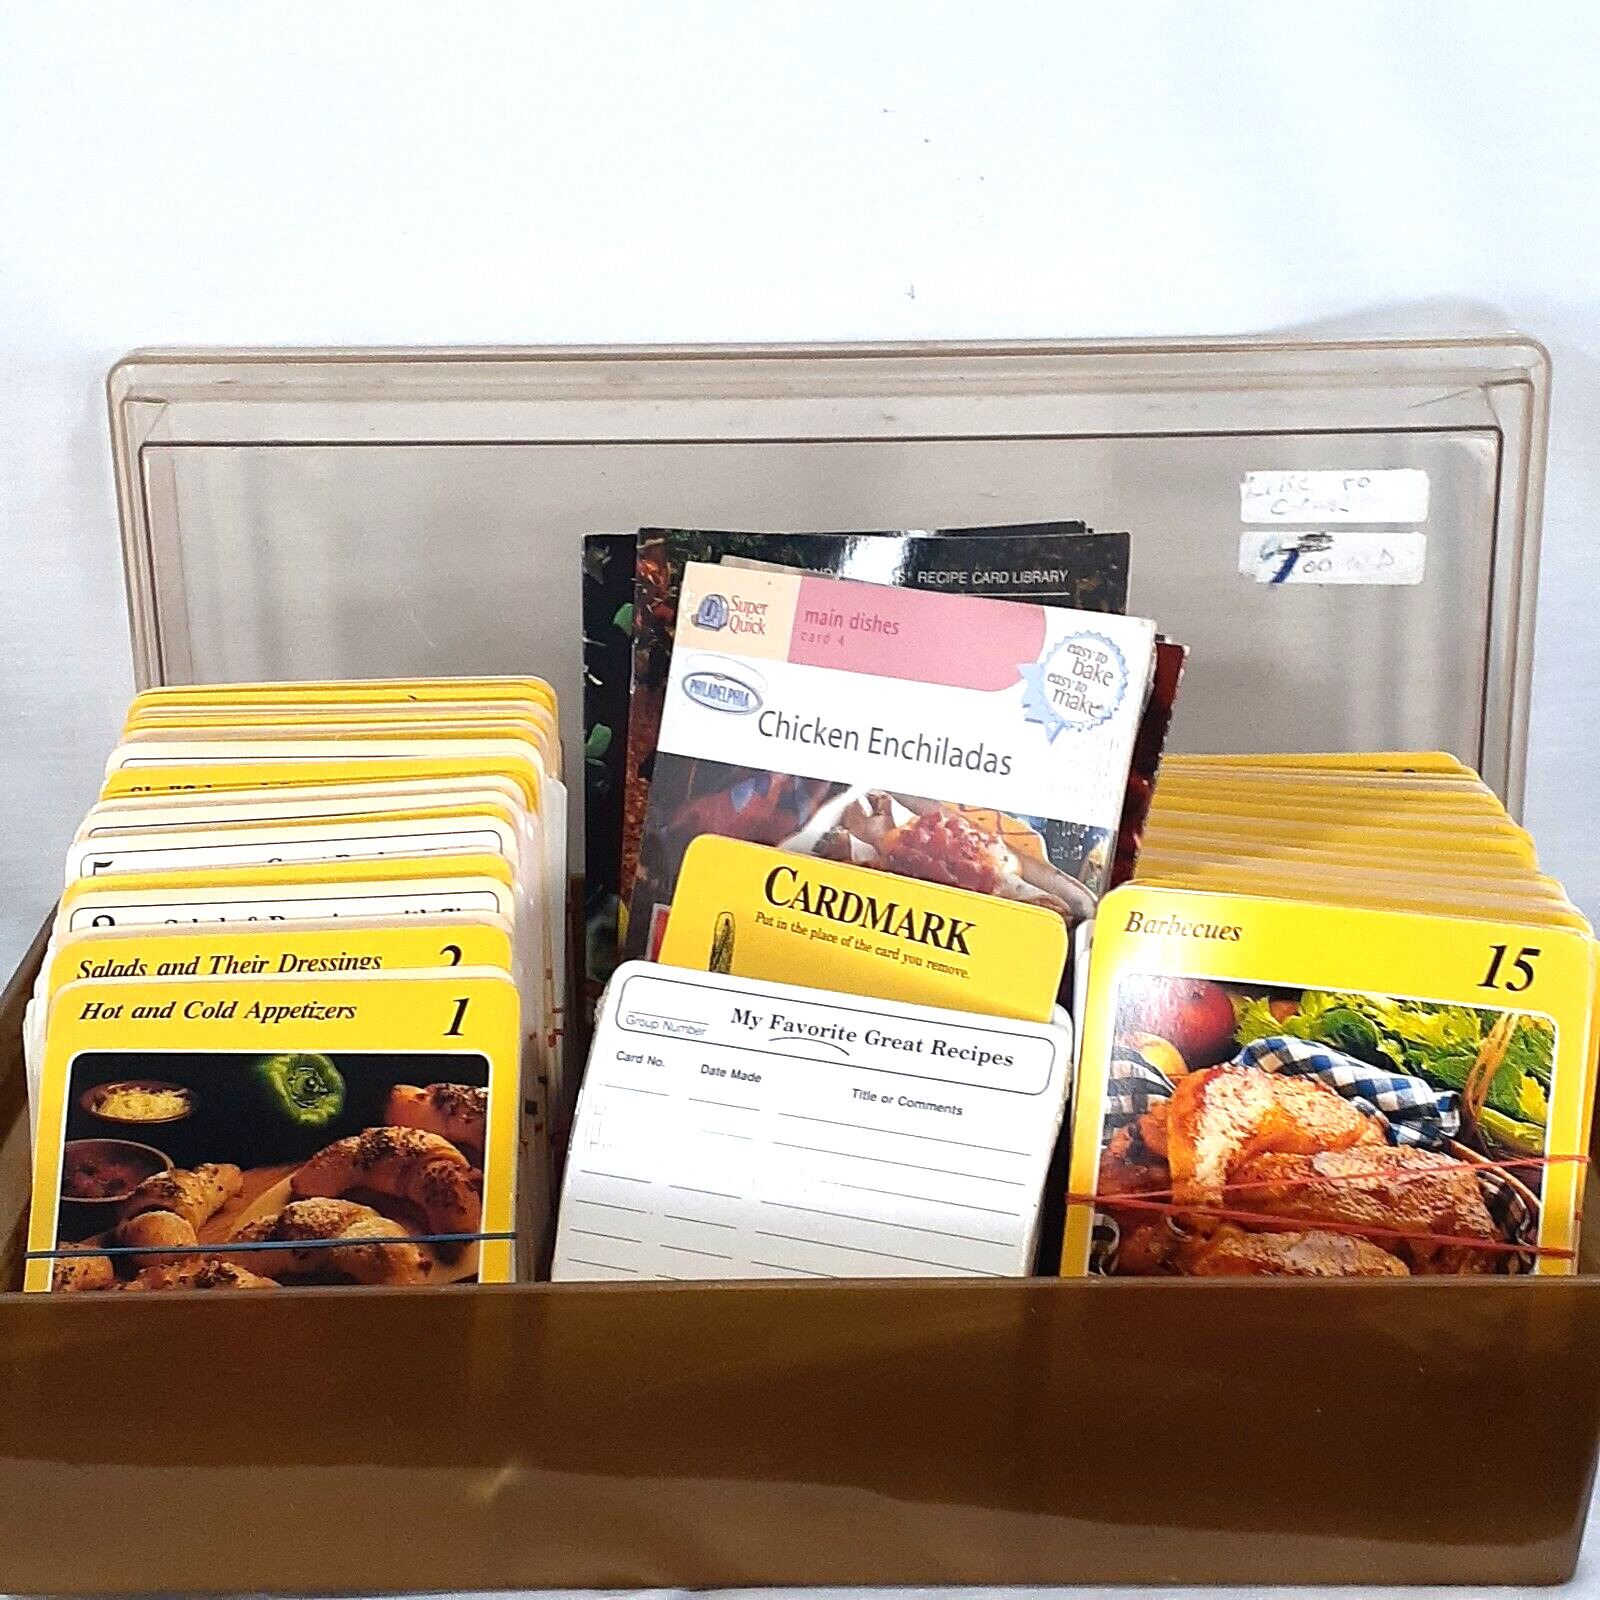 Vintage 1989 Cardmark My Great Recipes Cards Set and Plastic Storage Box